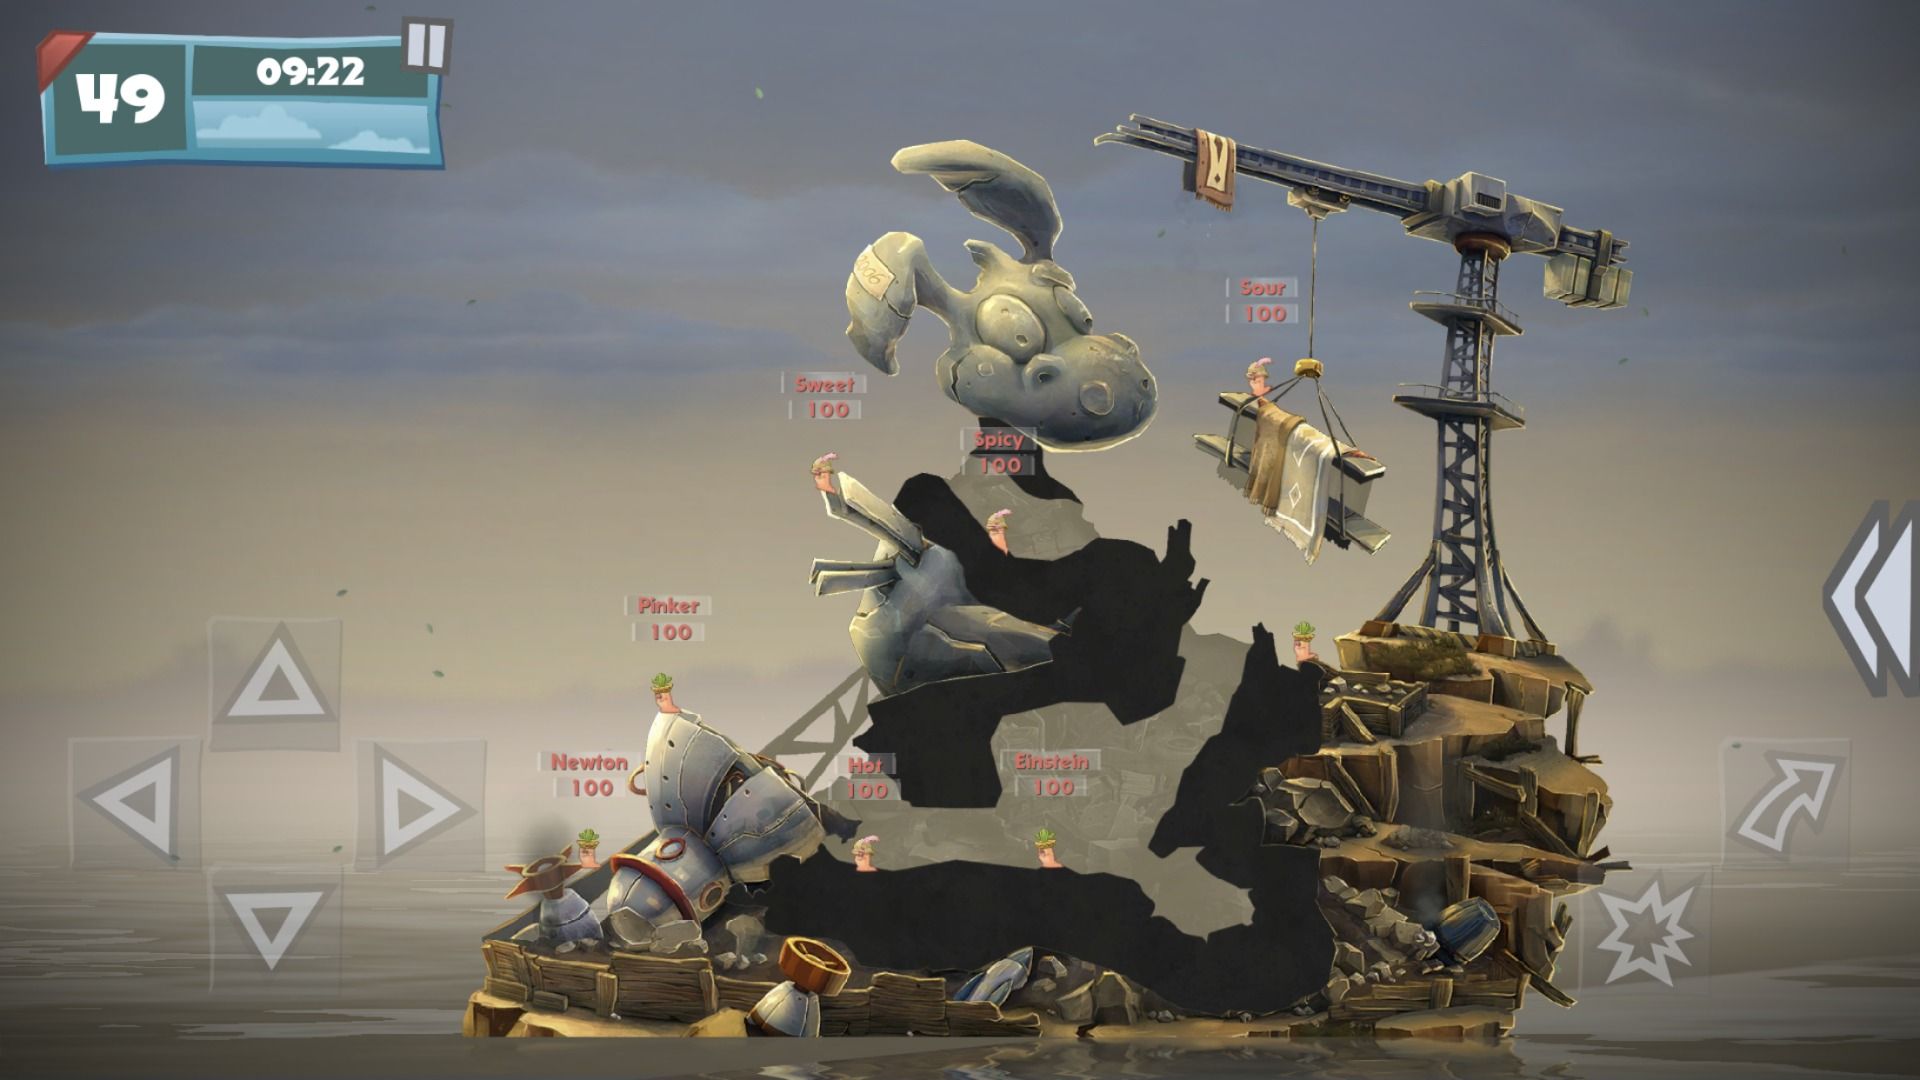 screenshot from worms wmd showing a game in progress